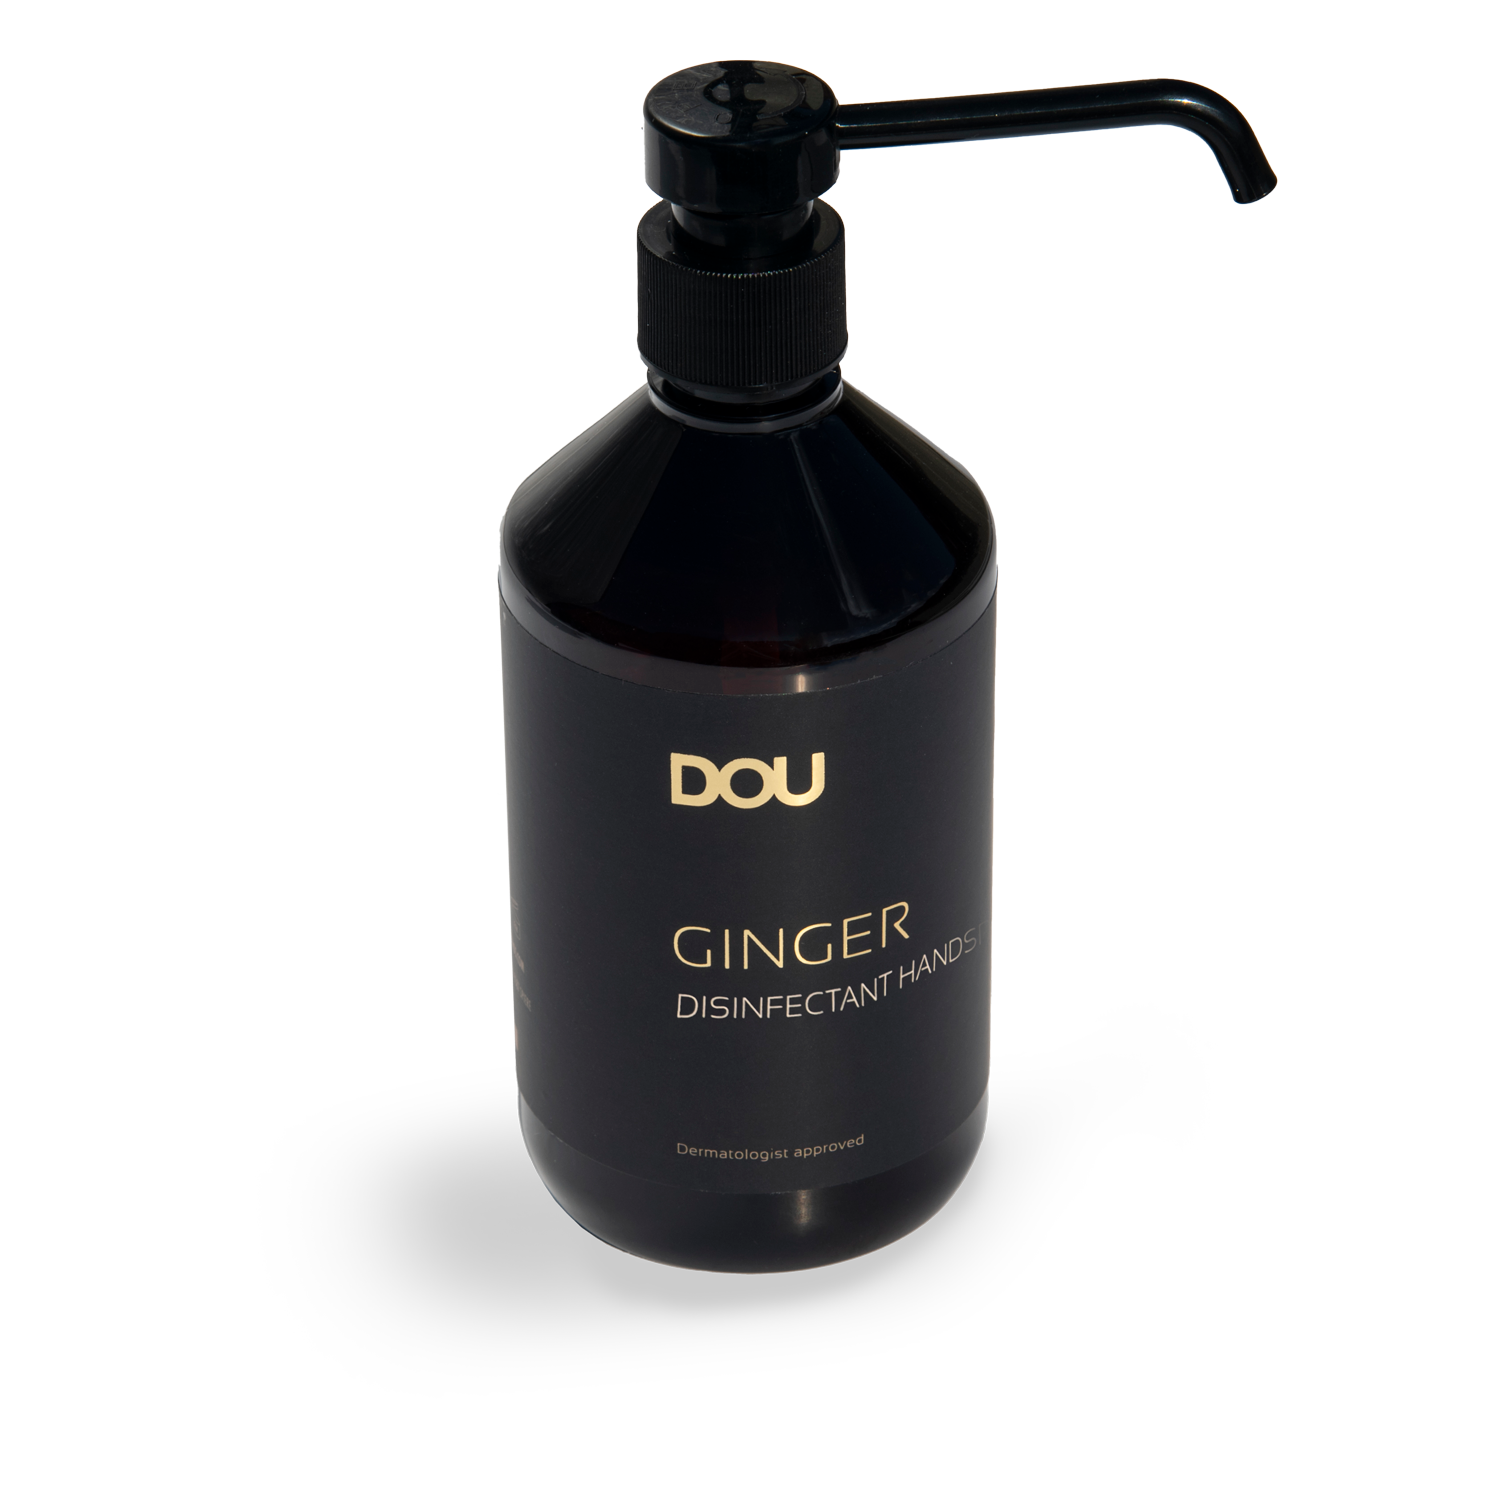 DOU My Hands Luxury Ginger Disinfectant Spray